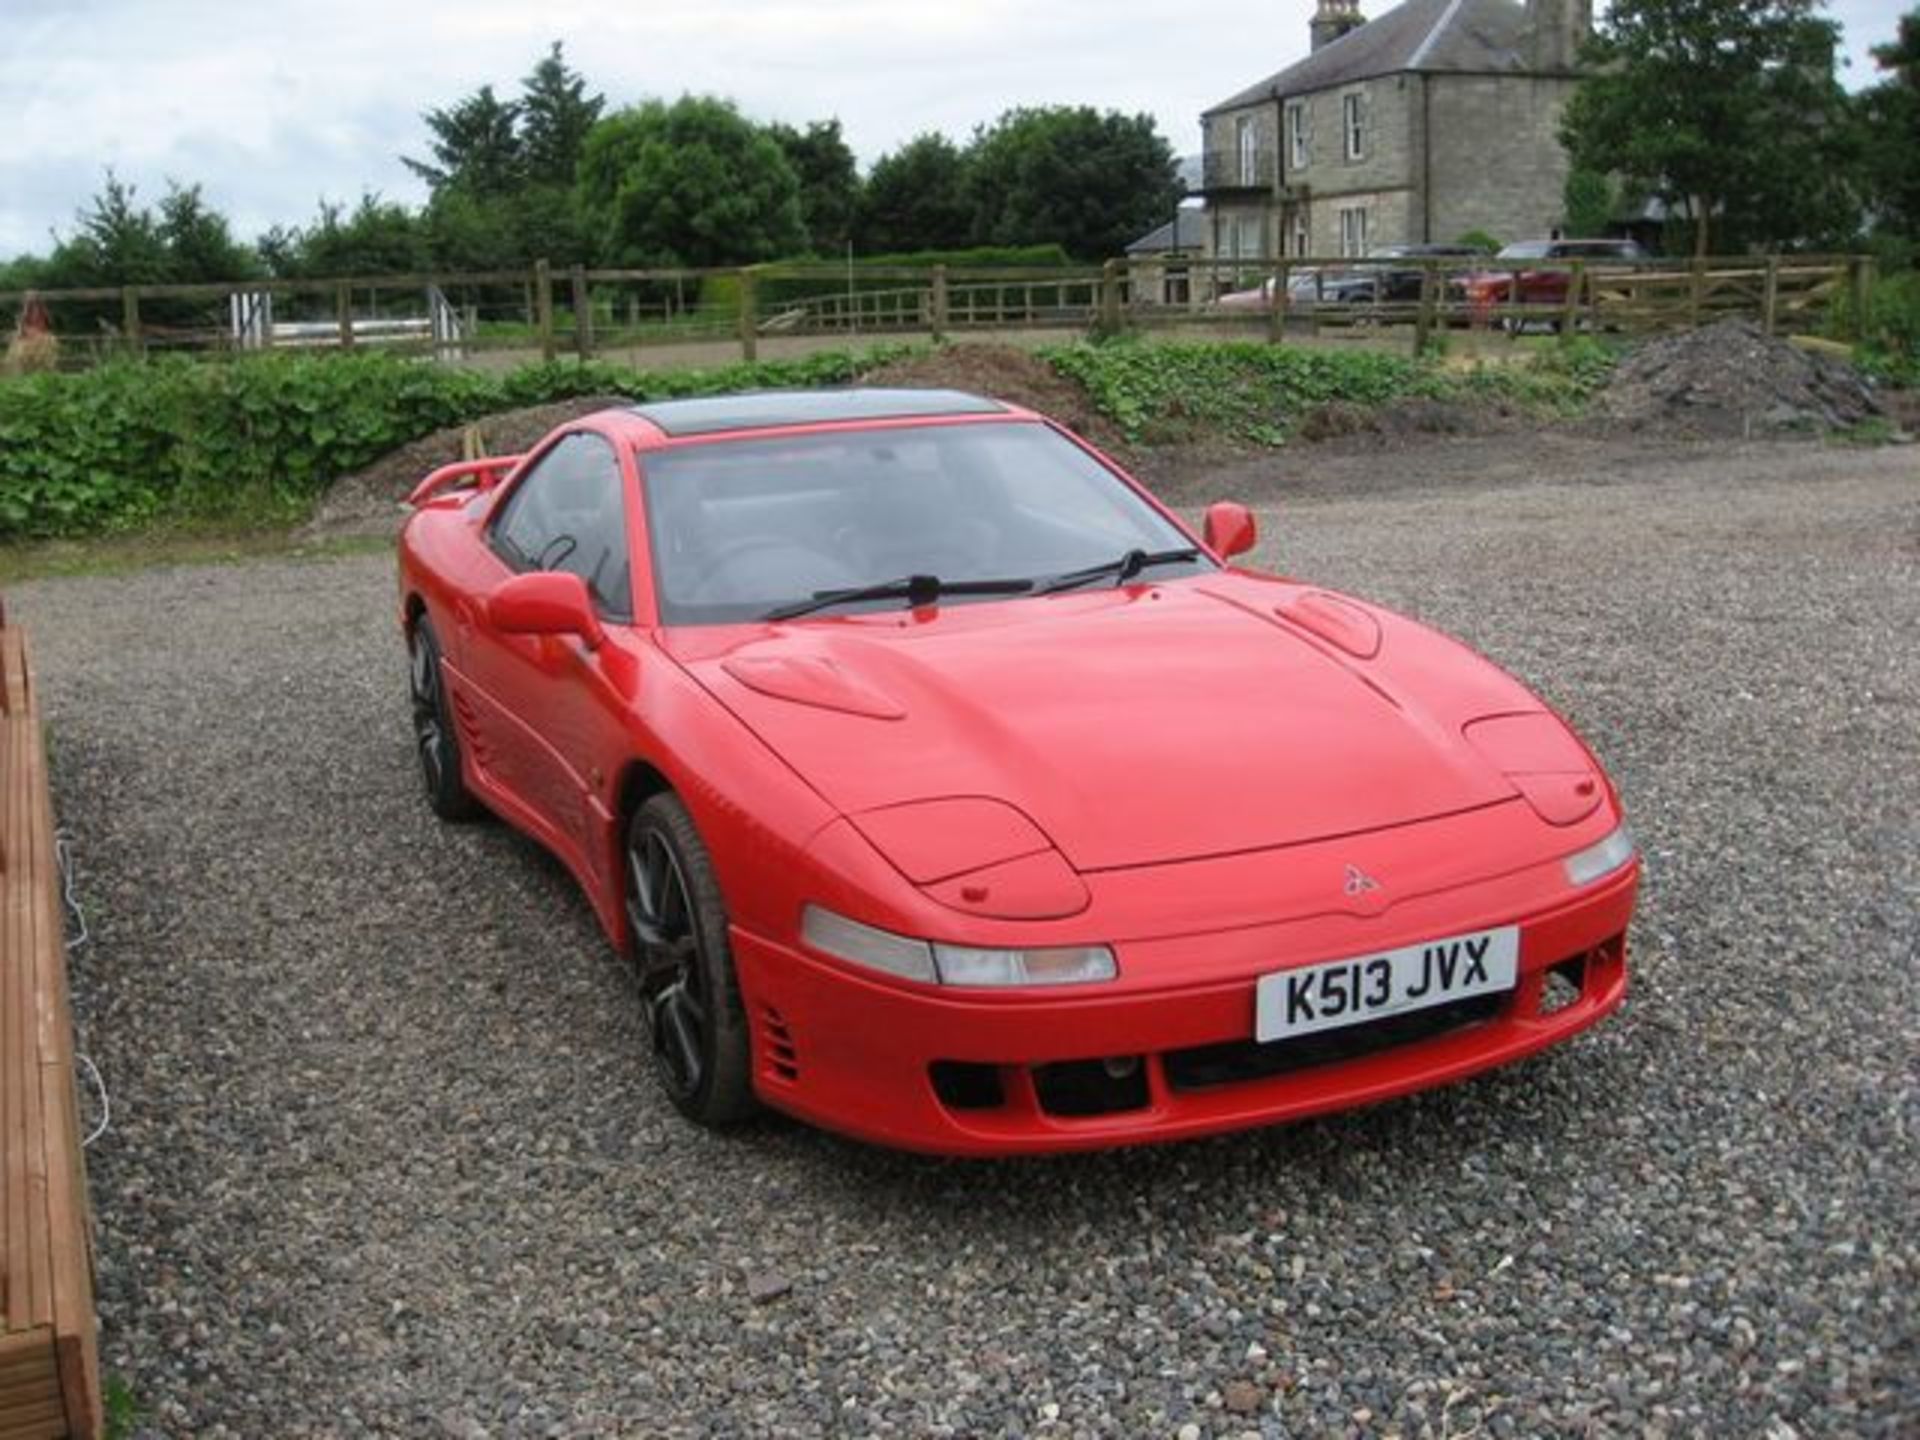 MITSUBISHI, 3000 GT V6 TURBO - 2972cc, Chassis number JMAMNZ16APY000228 - presented with an